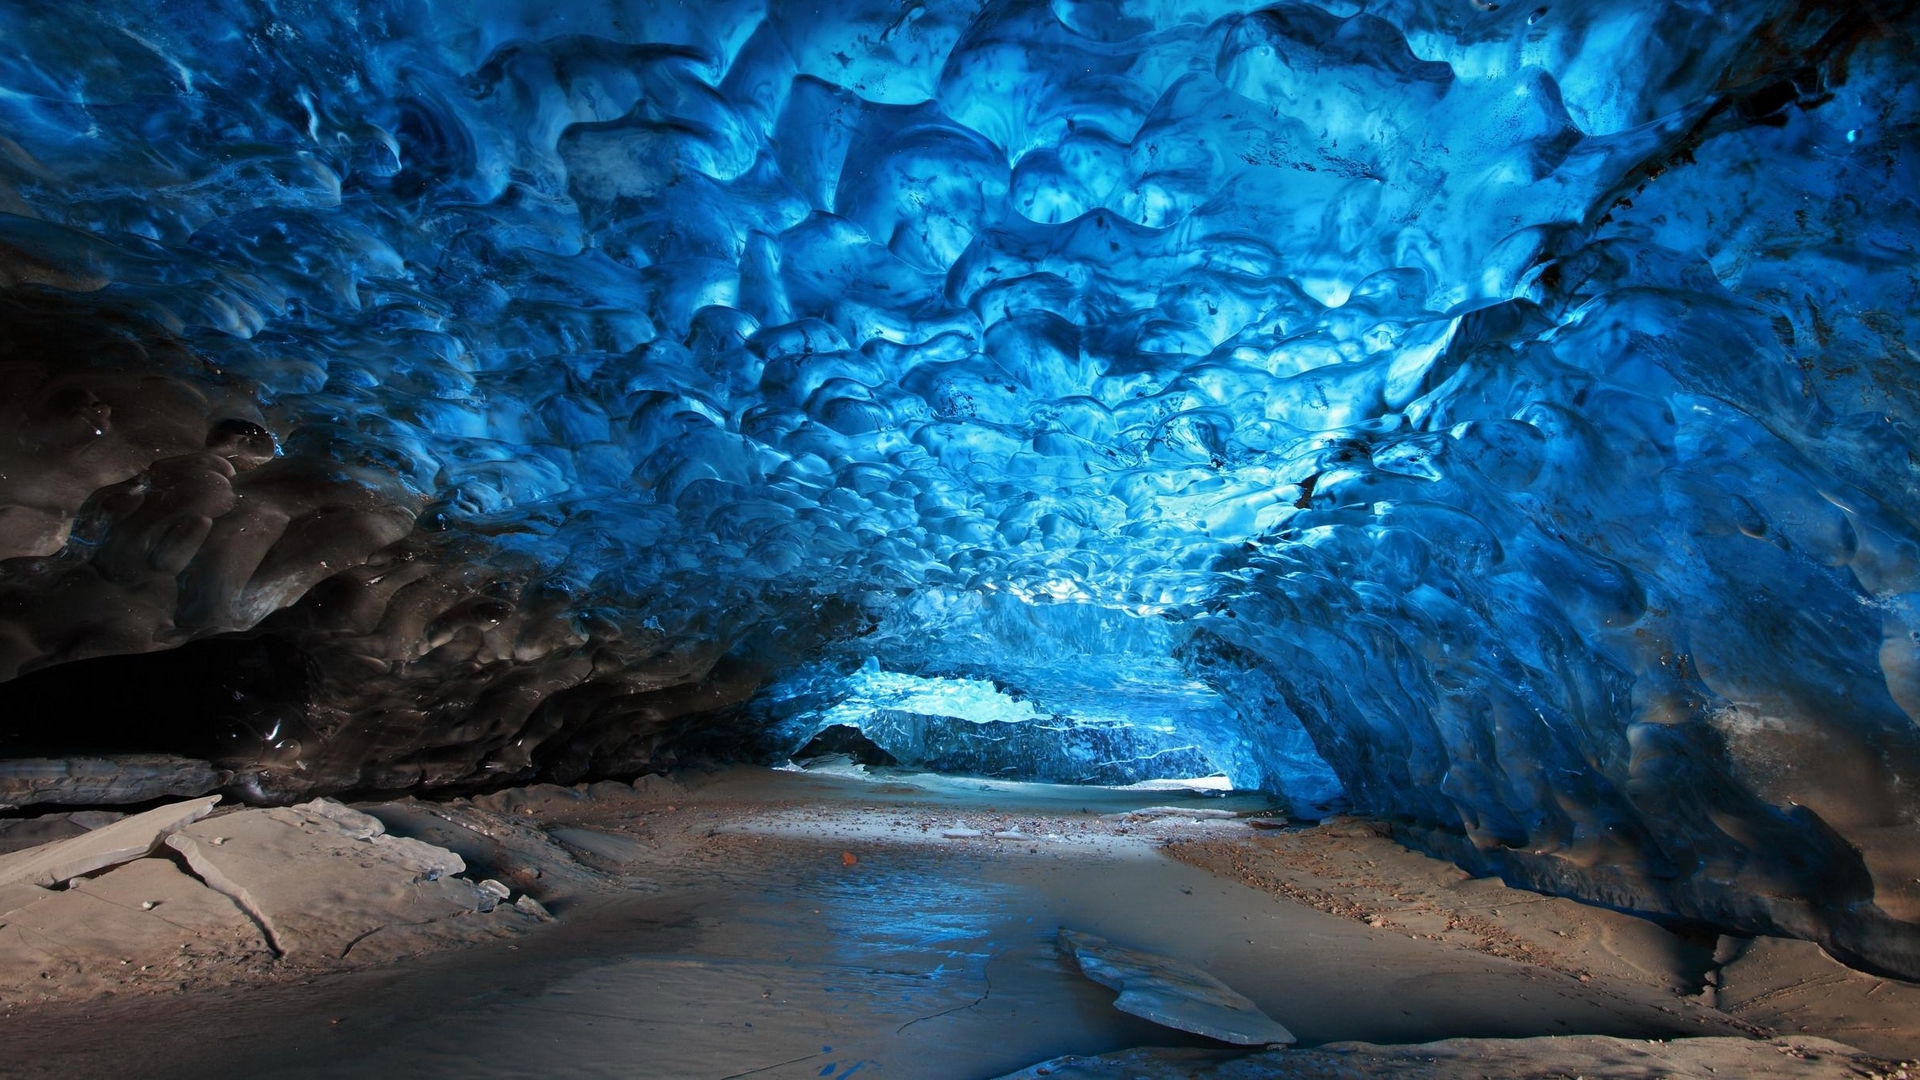 Blue Ice Cave Wallpaper Photography 9954 Wallpaper High Resolution